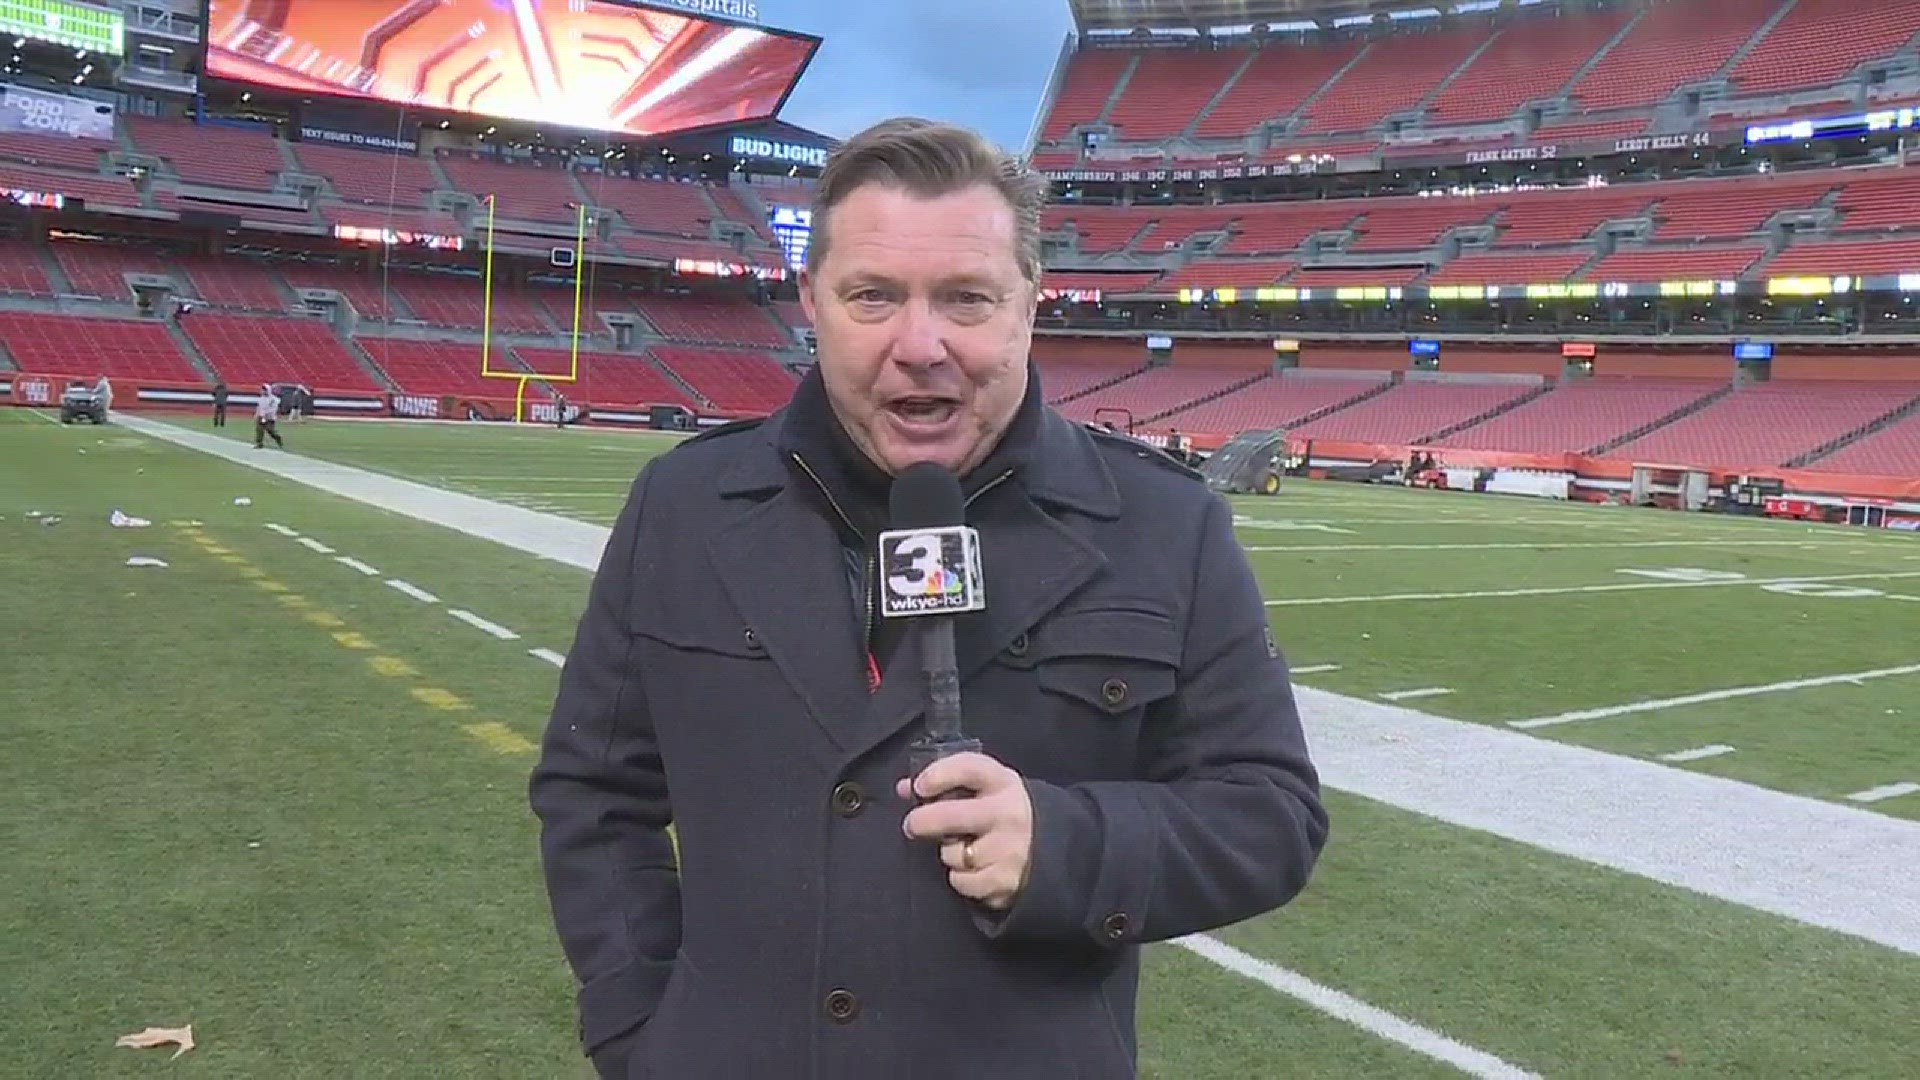 Here's Jimmy's Take on the Browns vs. Steelers game on November 20.